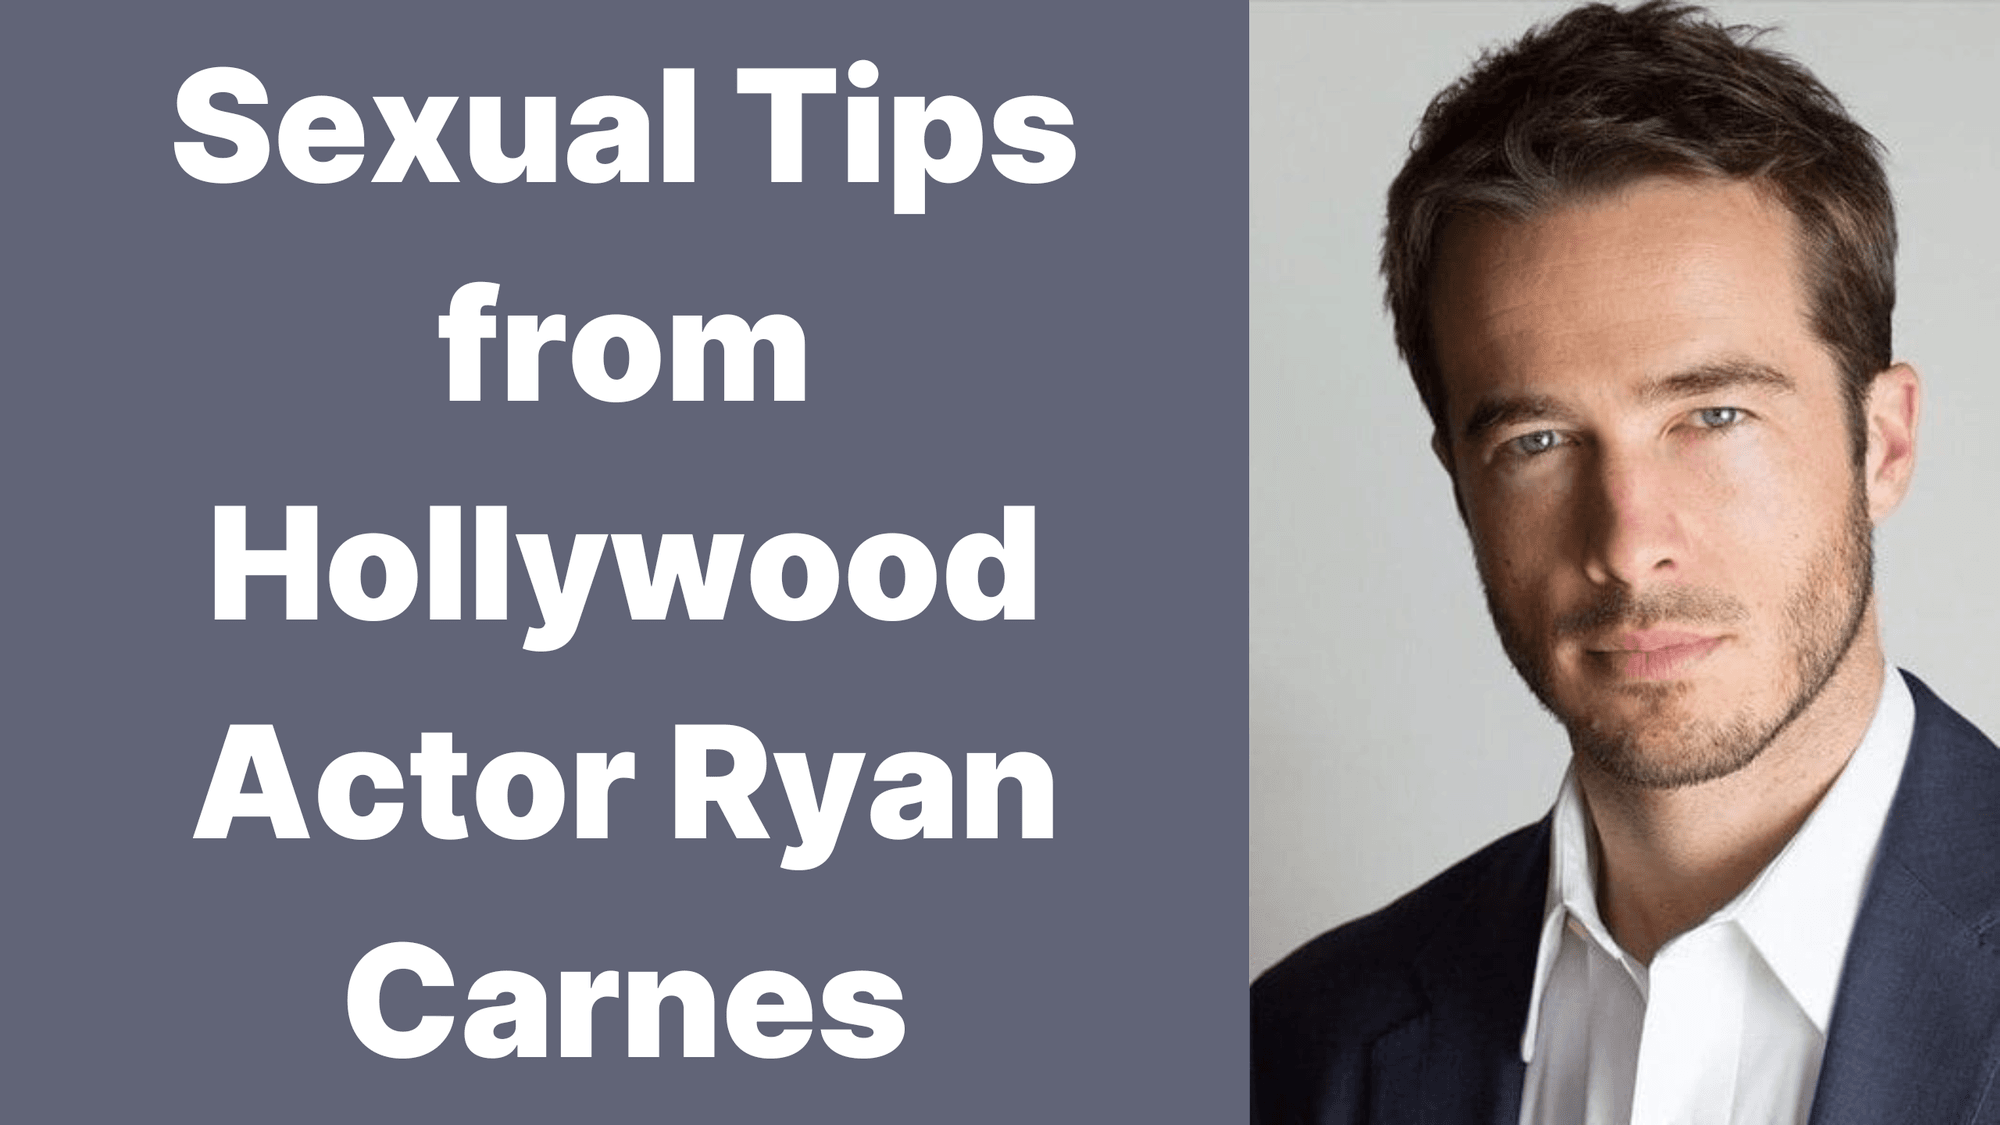 Sexual Tips from Hollywood Actor Ryan Carnes cover